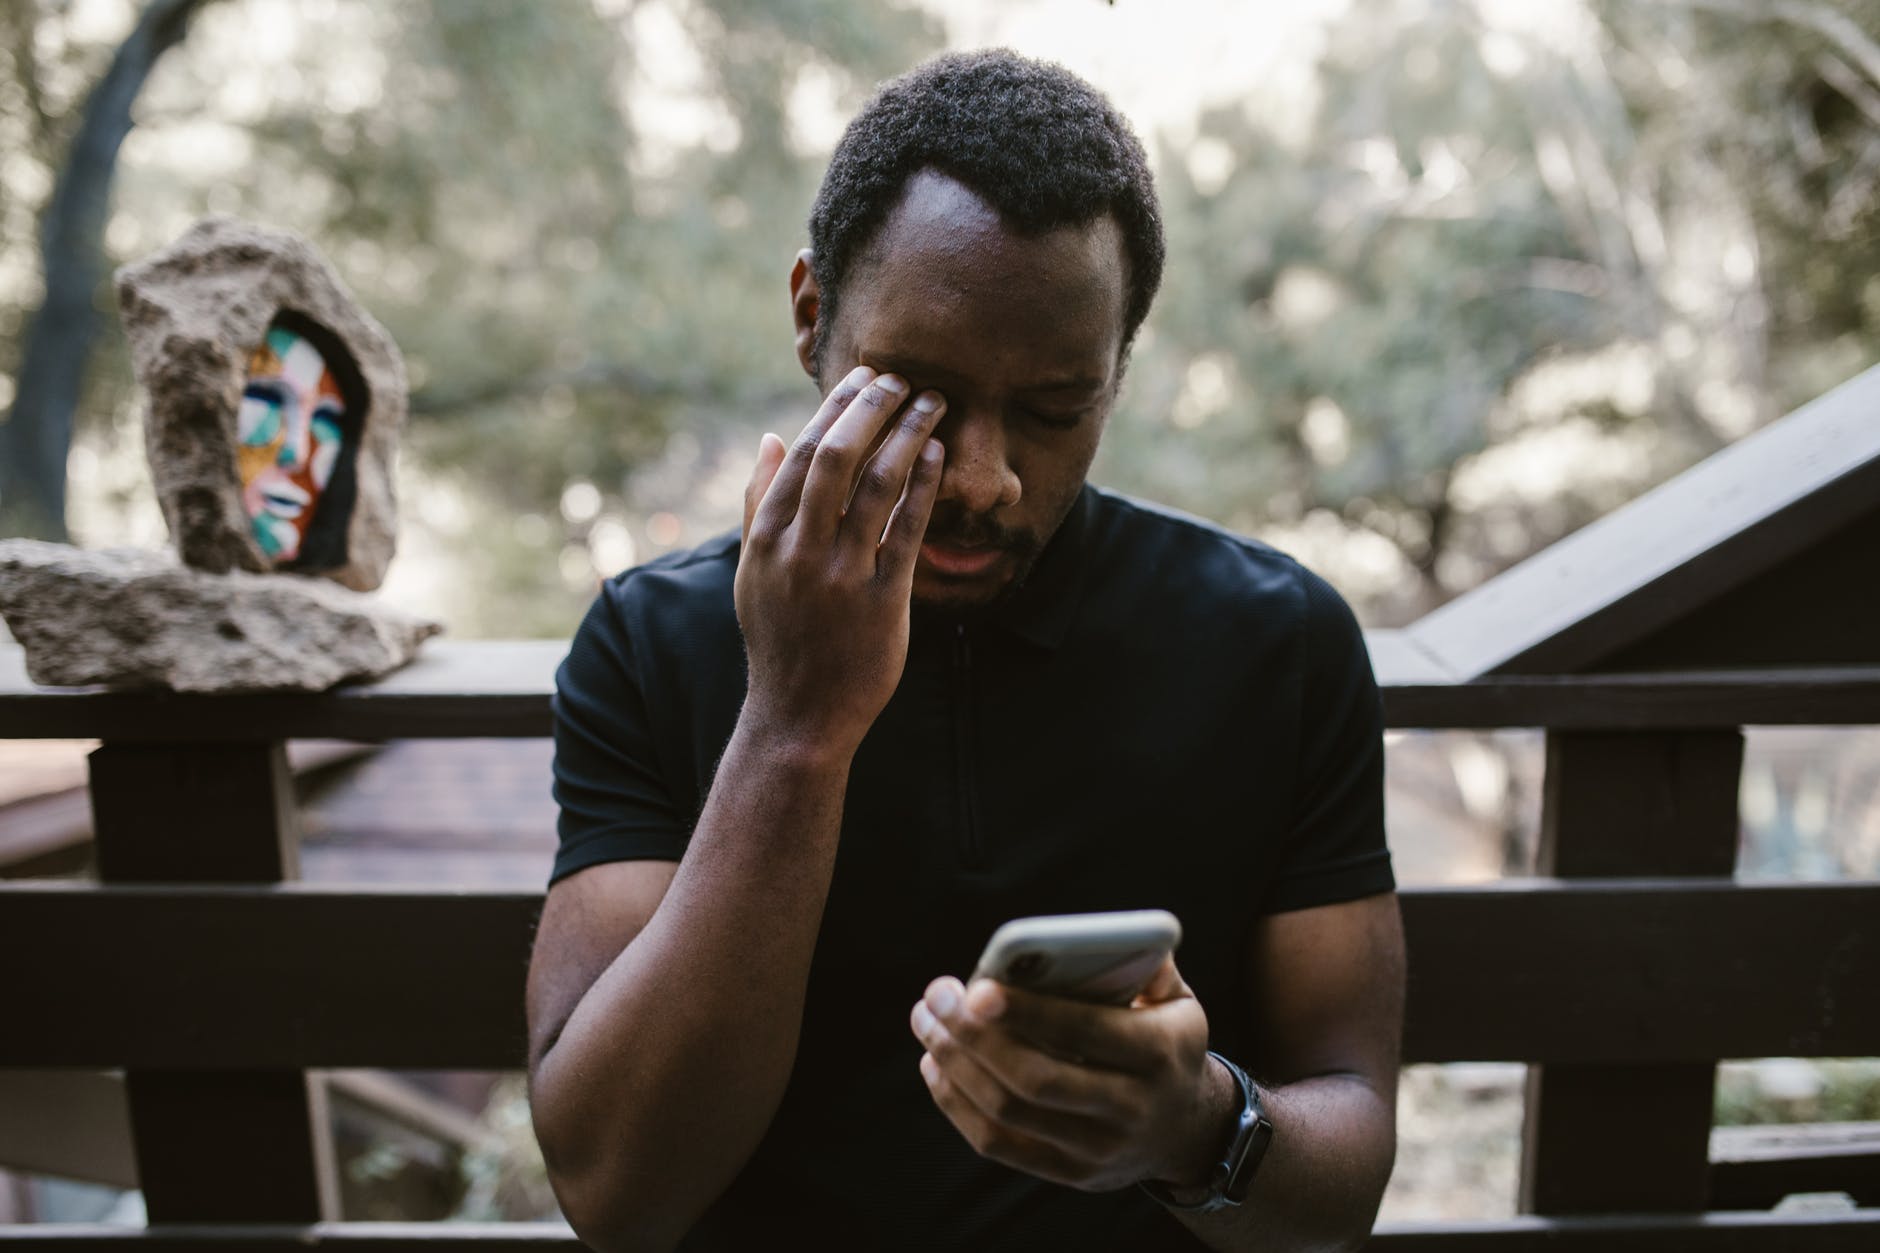 man wiping eye and holding cellphone